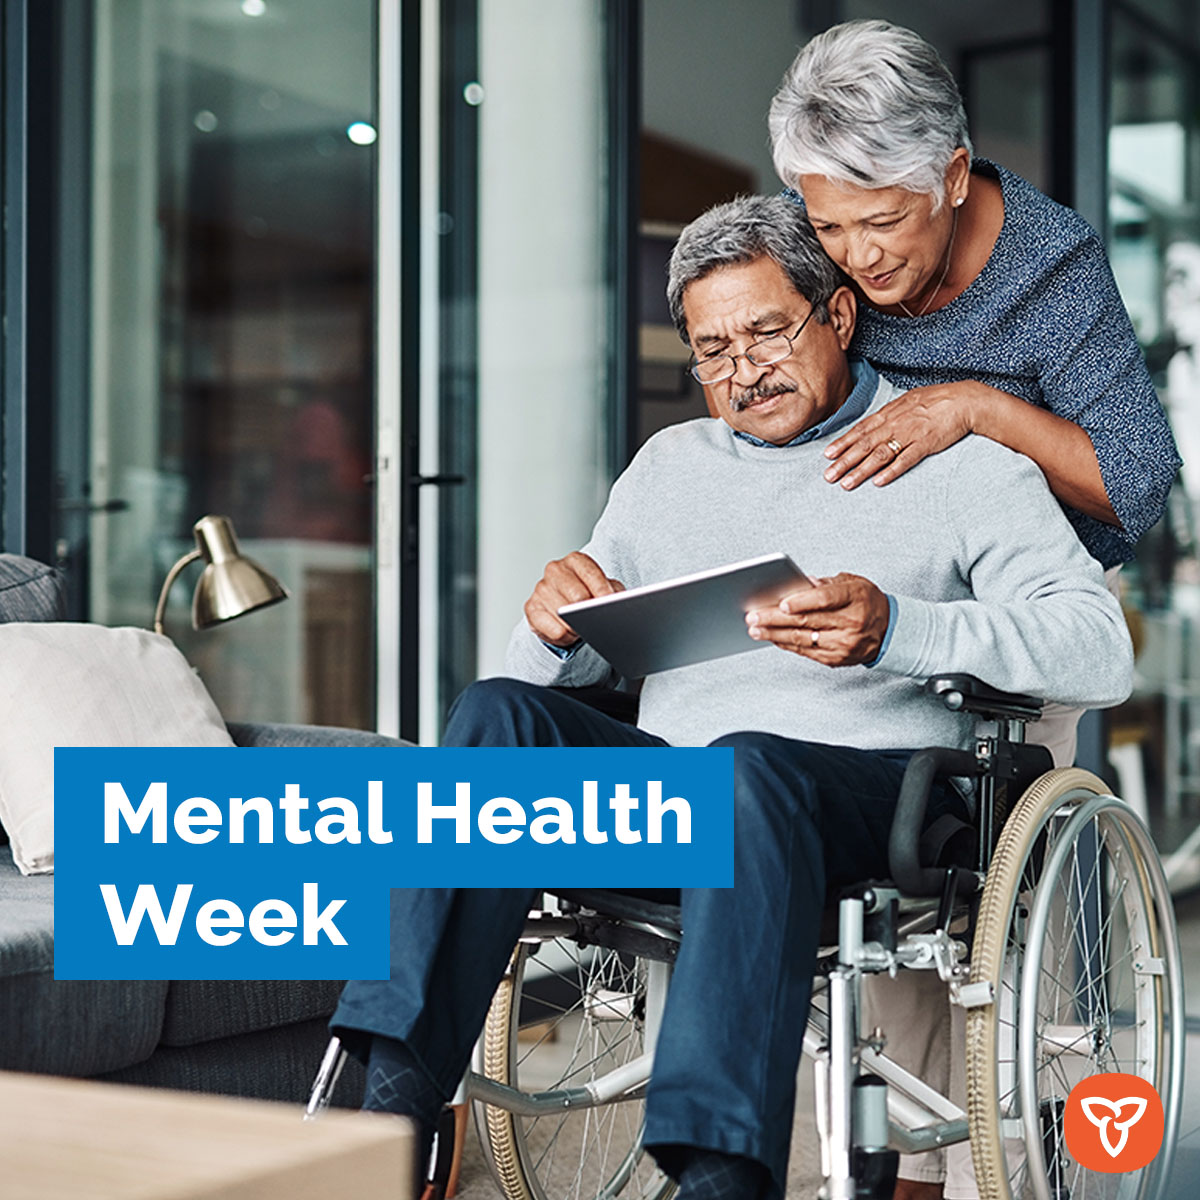 Mental health is just as important as physical health. Many support services are available if you need someone to talk to. Find the help you need and connect with someone today. ontario.ca/MentalHealth #CompassionConnects #MentalHealthWeek @ONThealth @CMHAOntario